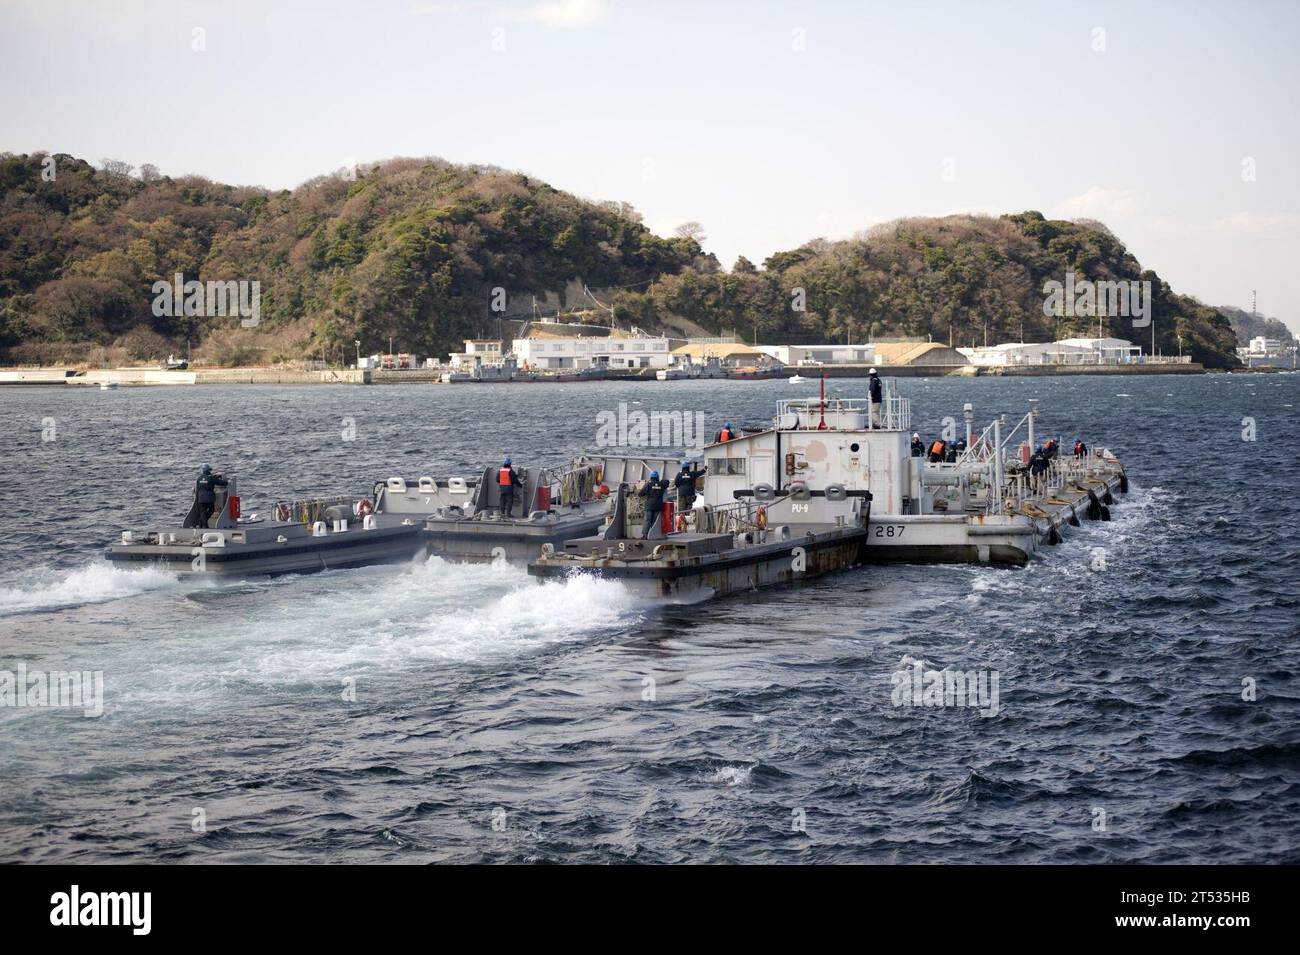 110326UZ446-088 YOKOSUKA, Japan (March 26, 2011) U.S. Navy Barge YON-287, filled with 851,000 liters (225,000 gallons) of fresh water, departs Fleet Activities Yokosuka to support cooling efforts at the Fukushima Daiichi nuclear power plant. YON-287 is the second of two barges supplied by the U.S. Navy to the government of Japan to aid in the cooling efforts. The two barges supplied a total of 1.89 million liters (500,000 gallons) of fresh water. Stock Photo